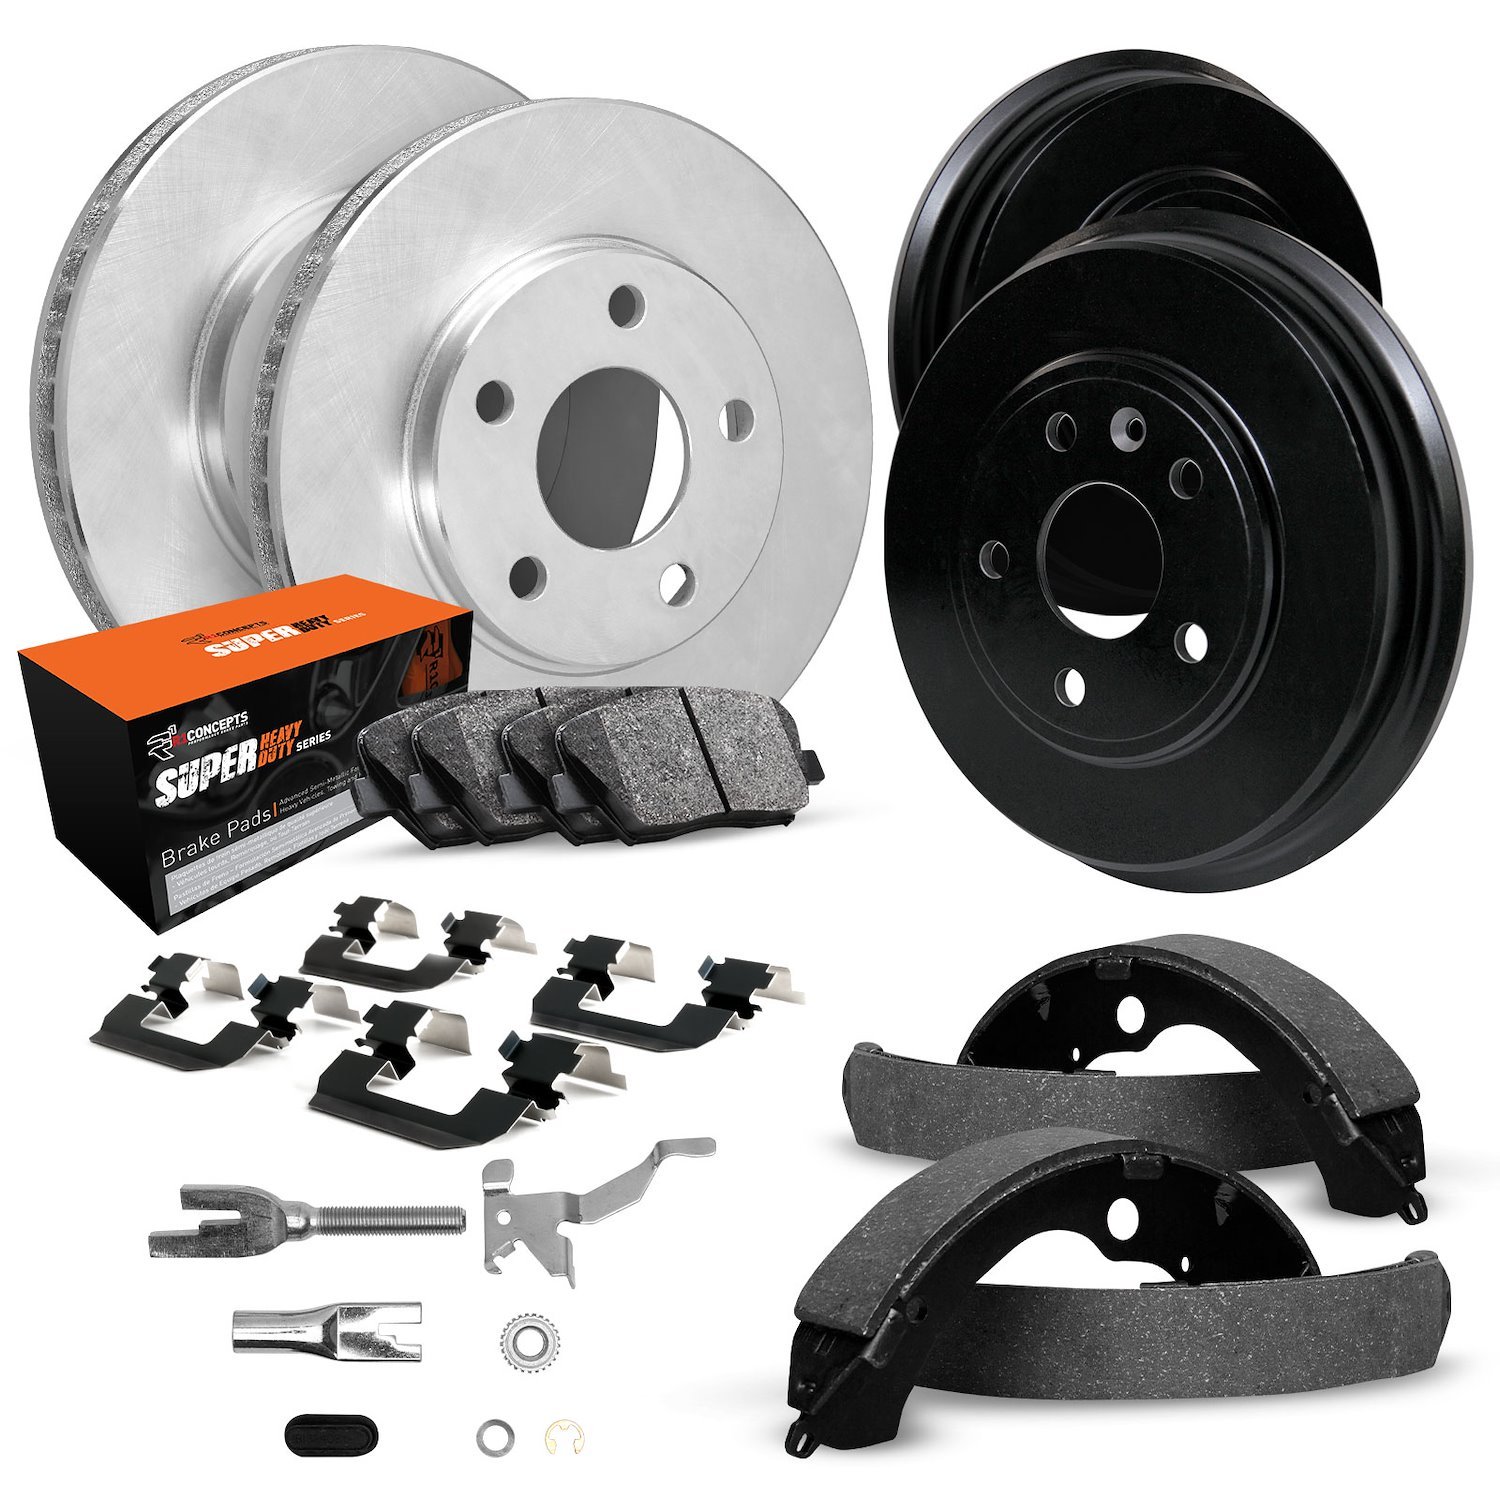 E-Line Blank Brake Rotor & Drum Set w/Super-Duty Pads, Shoes, Hardware, & Adjusters, 1986-1989 Ford/Lincoln/Mercury/Mazda